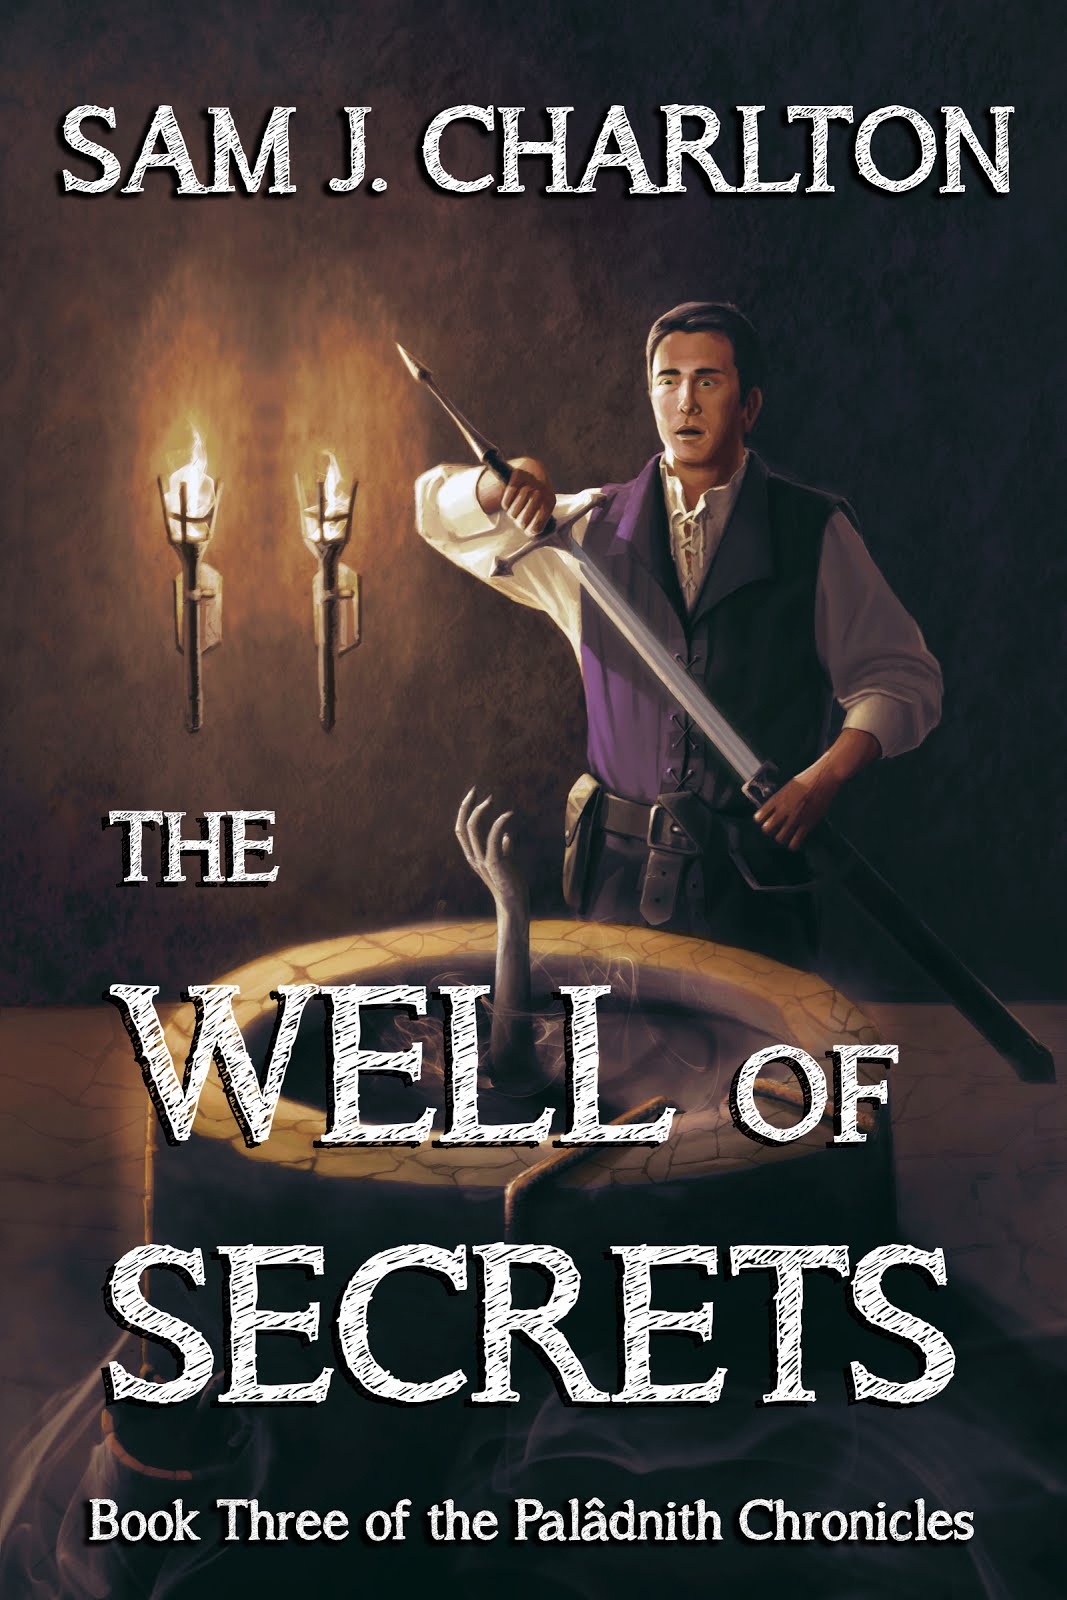 The Well of Secrets